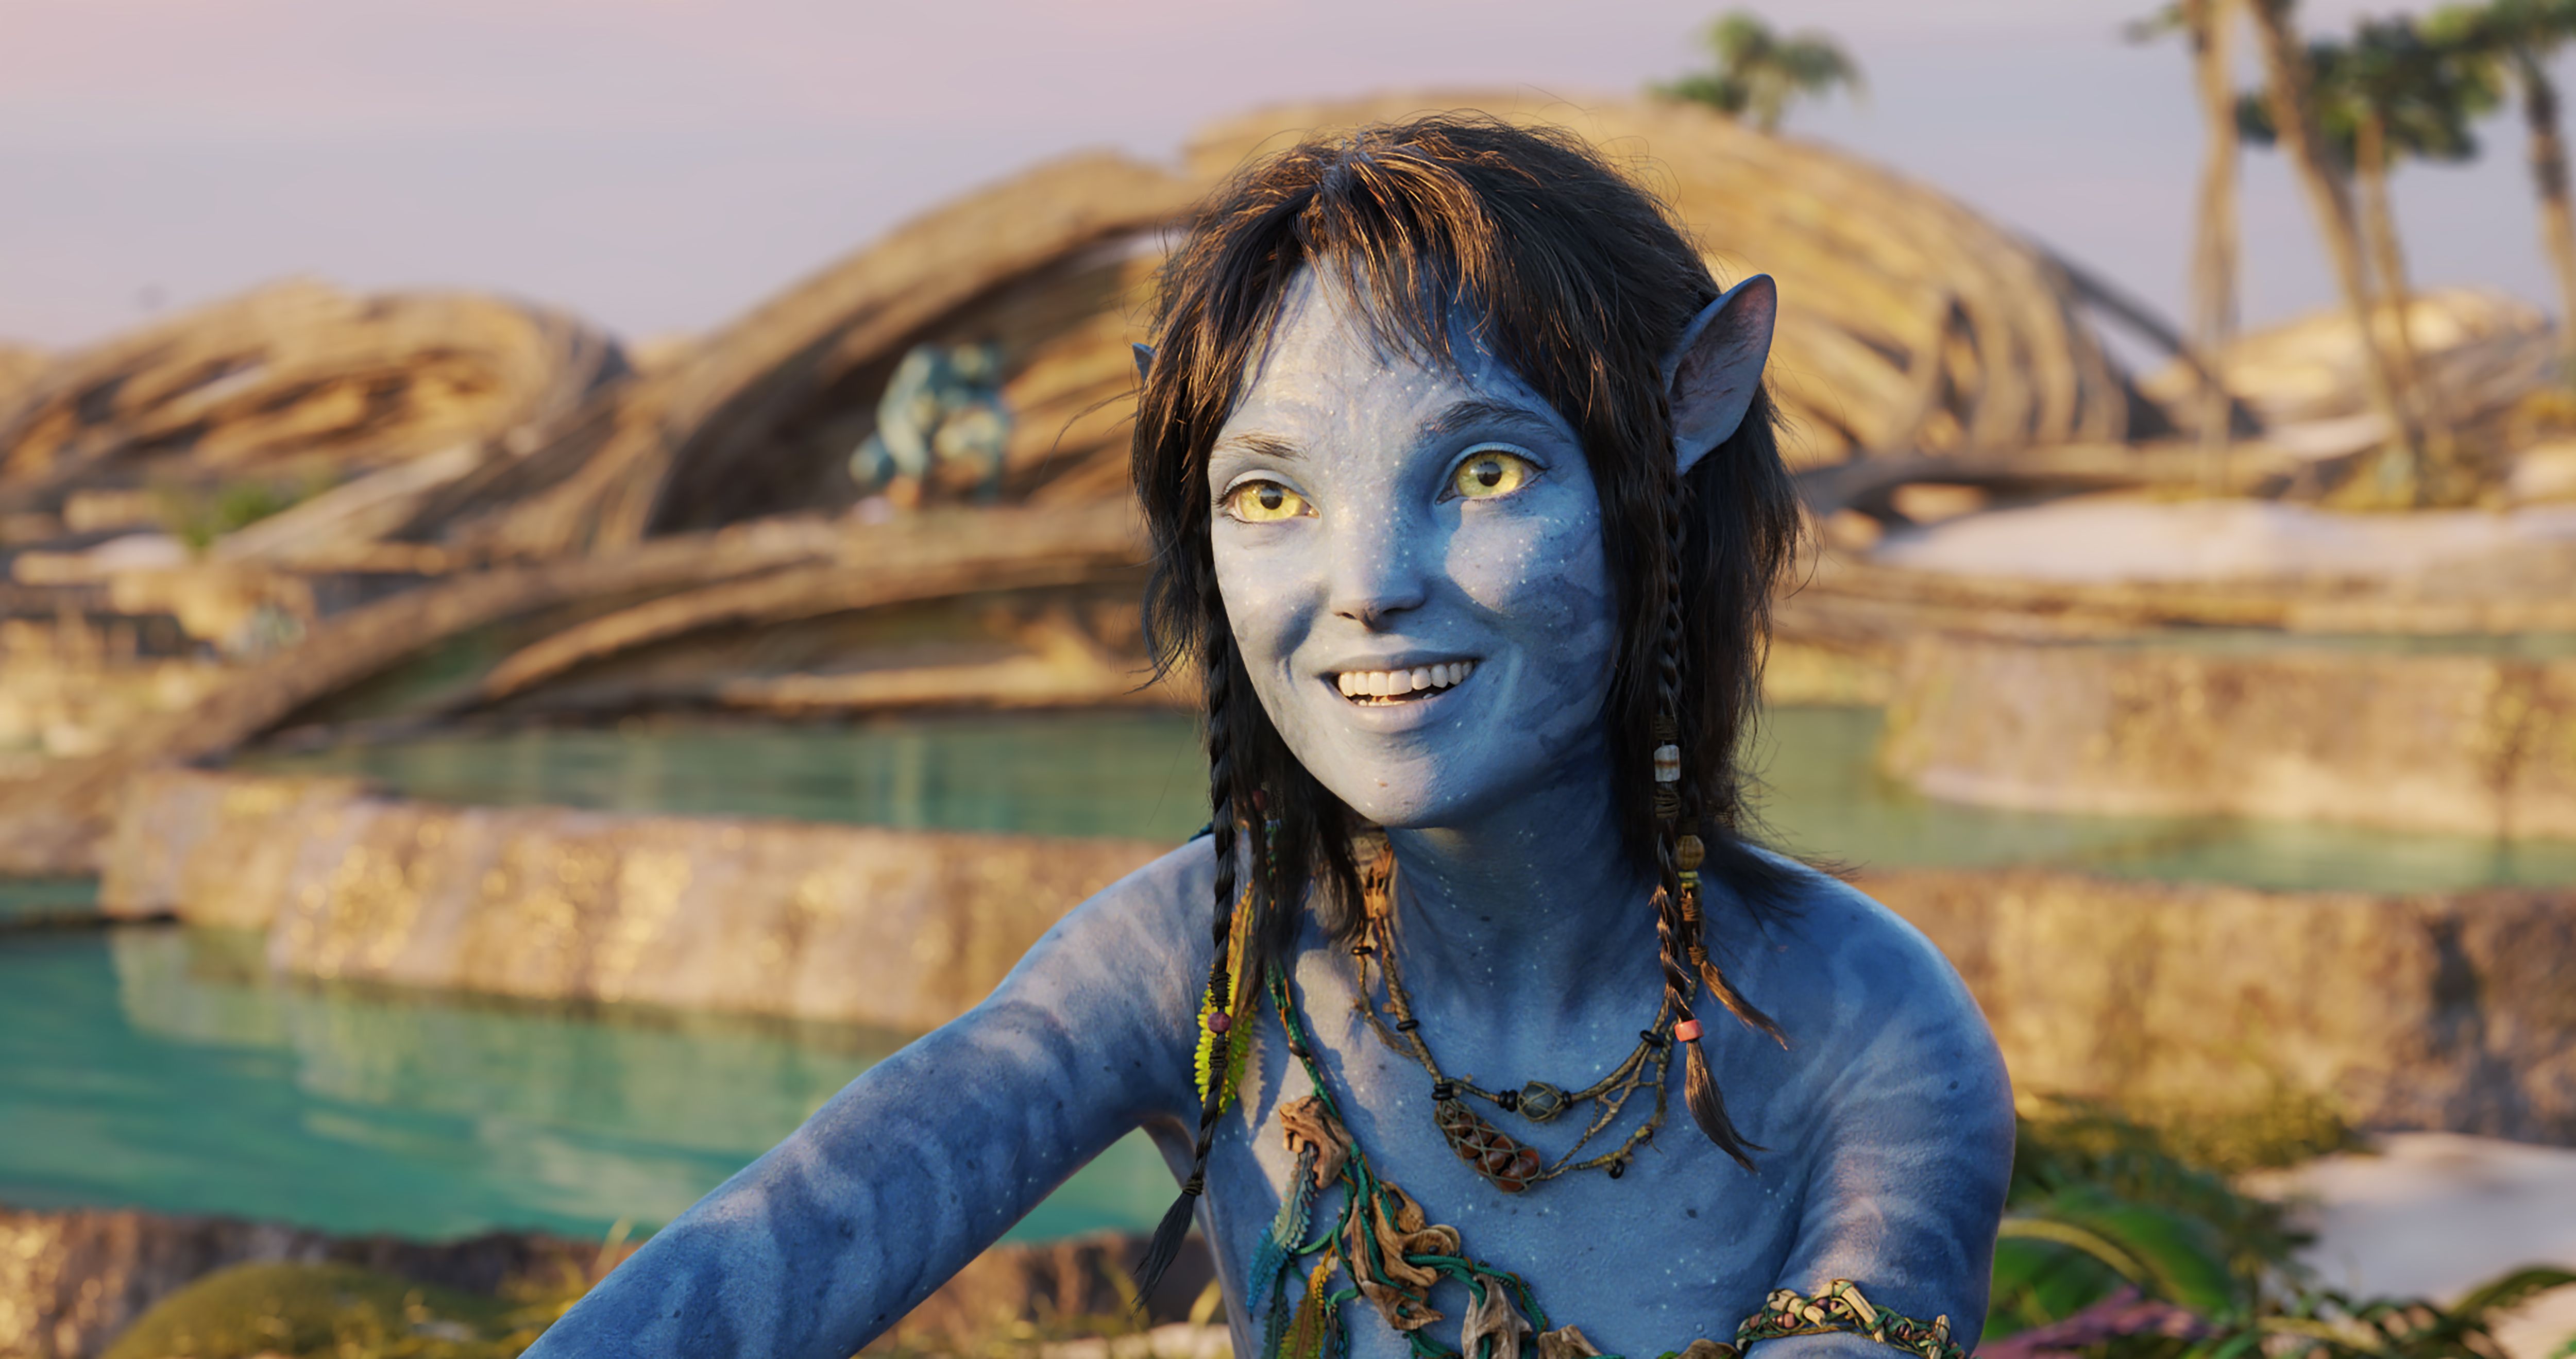 Avatar 2 release date trailer and more about The Way of Water